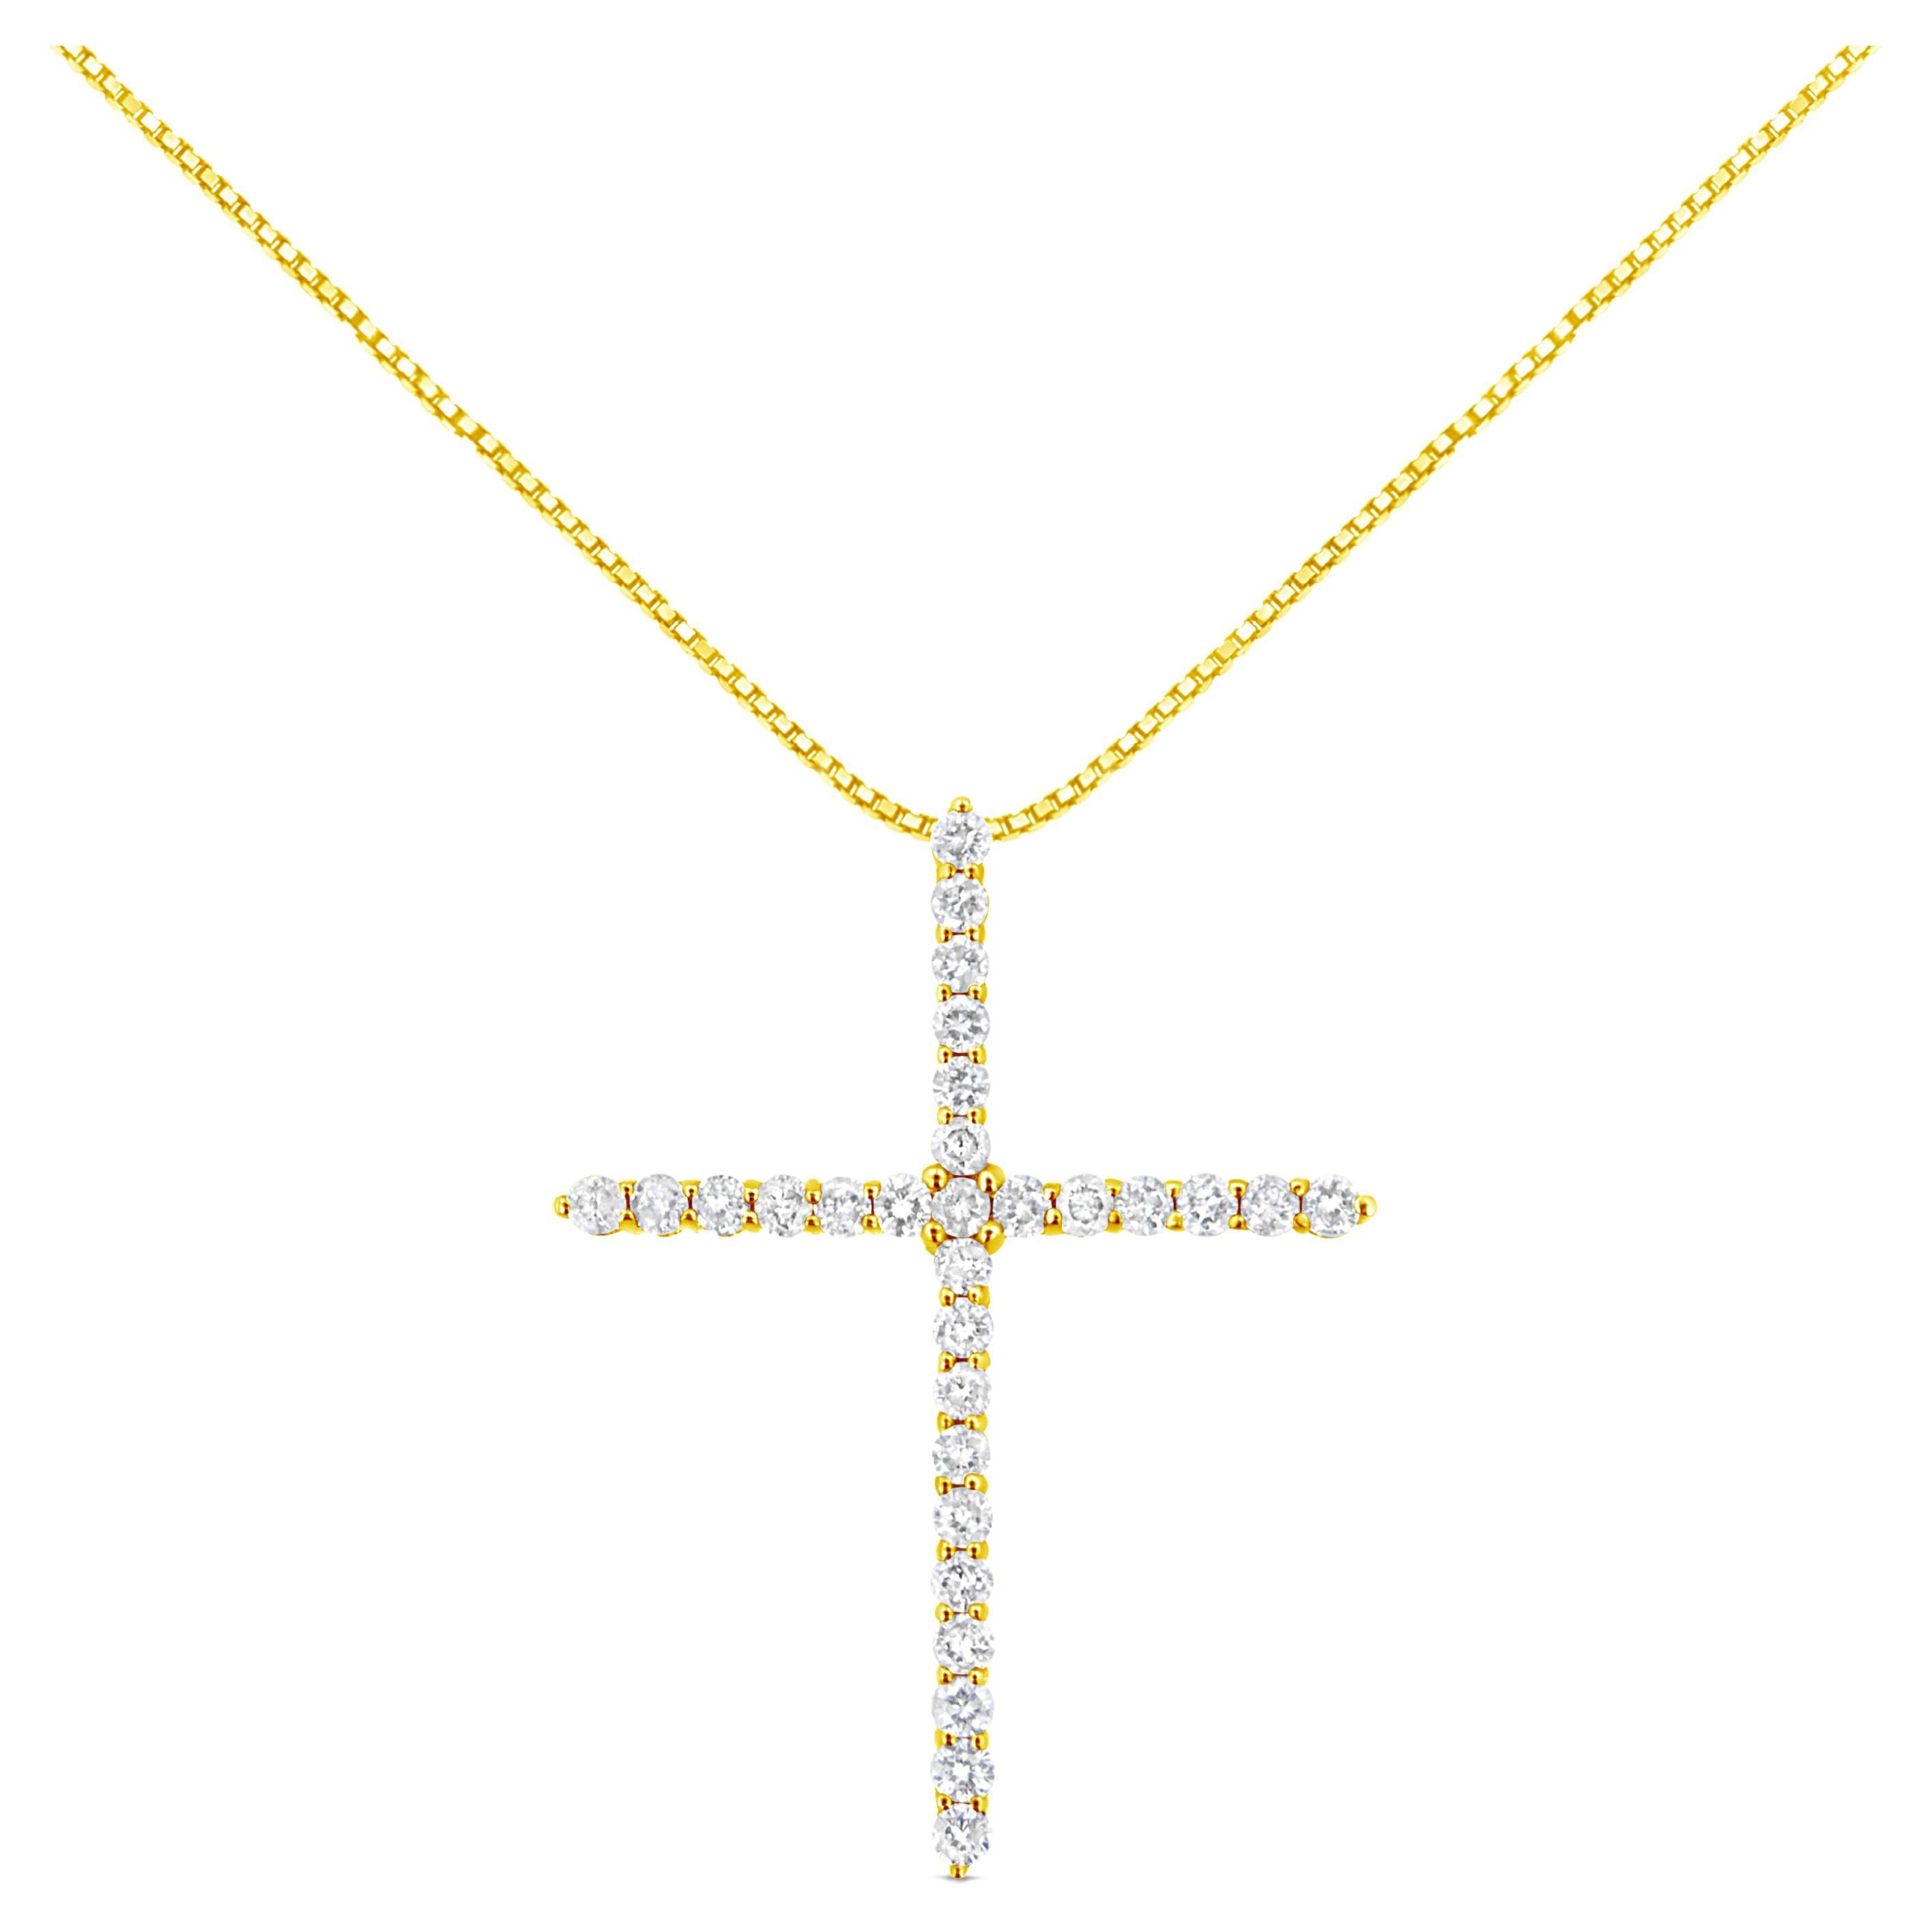 Yellow Gold Plated Sterling Silver 3.0 Carat Diamond Cross Pendant Necklace For Sale